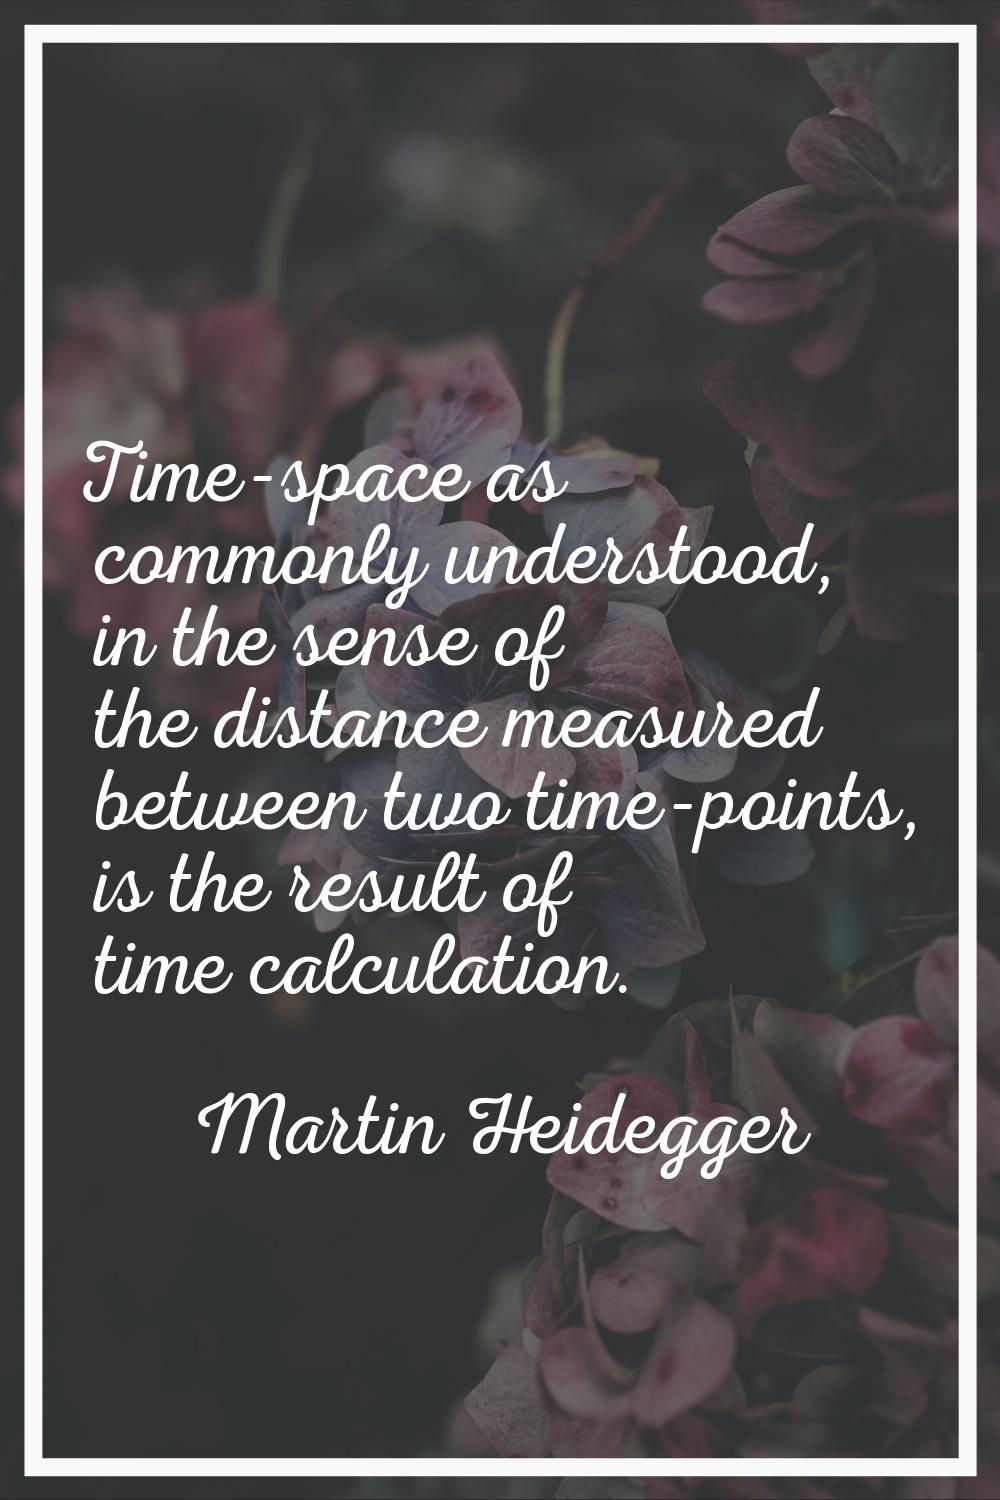 Time-space as commonly understood, in the sense of the distance measured between two time-points, i